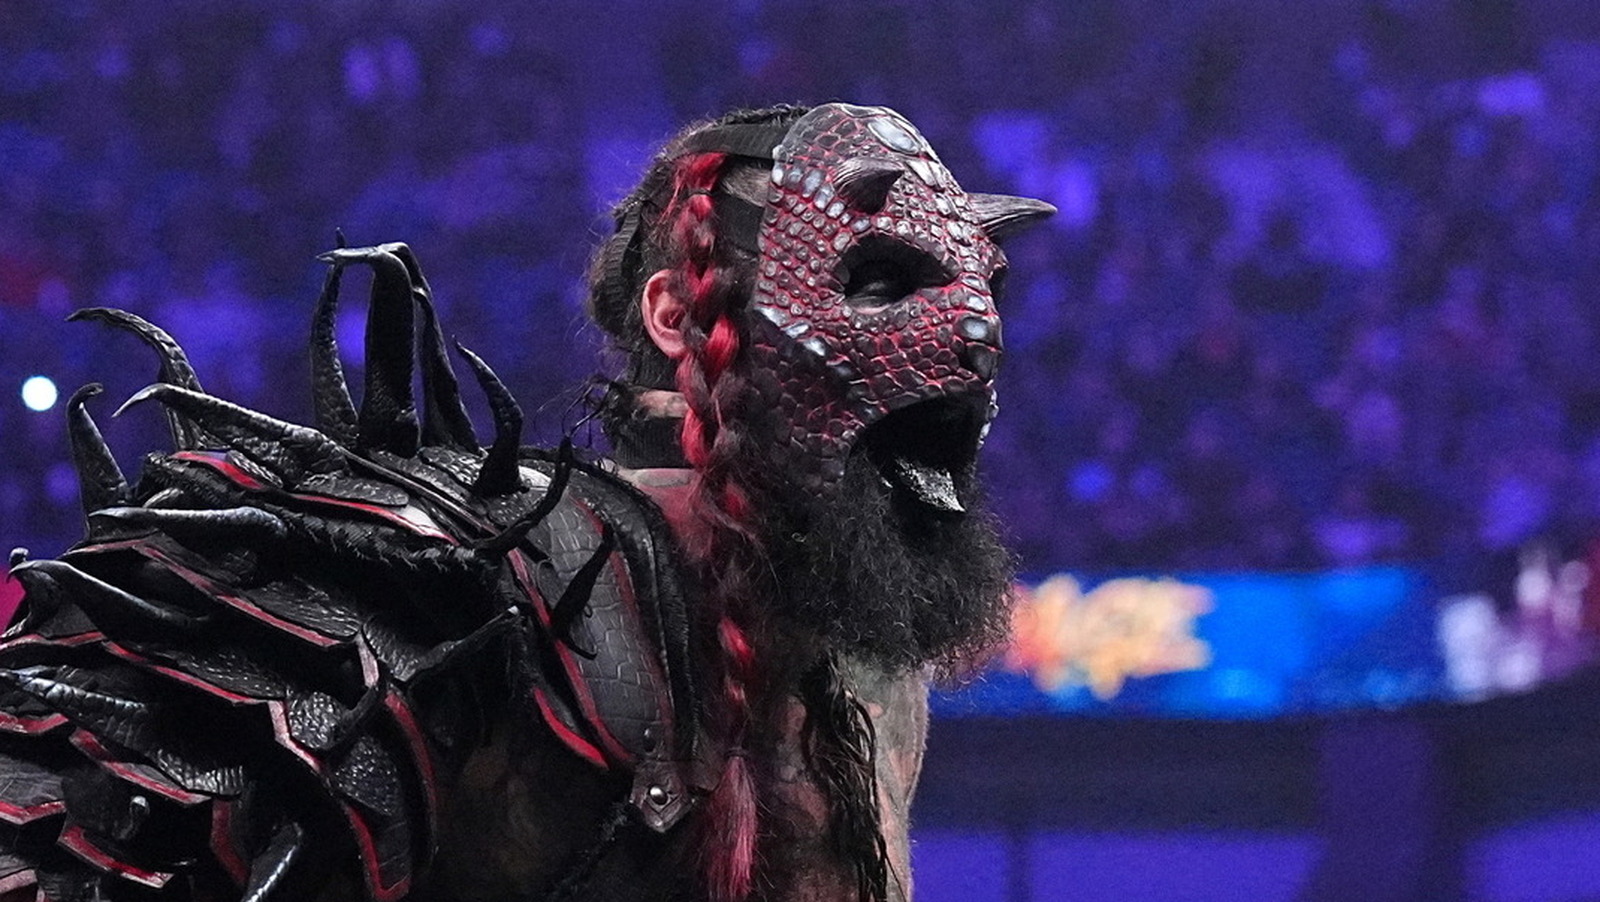 Details On Luchasaurus' Reported Injury Following Latest Episode Of AEW Collision